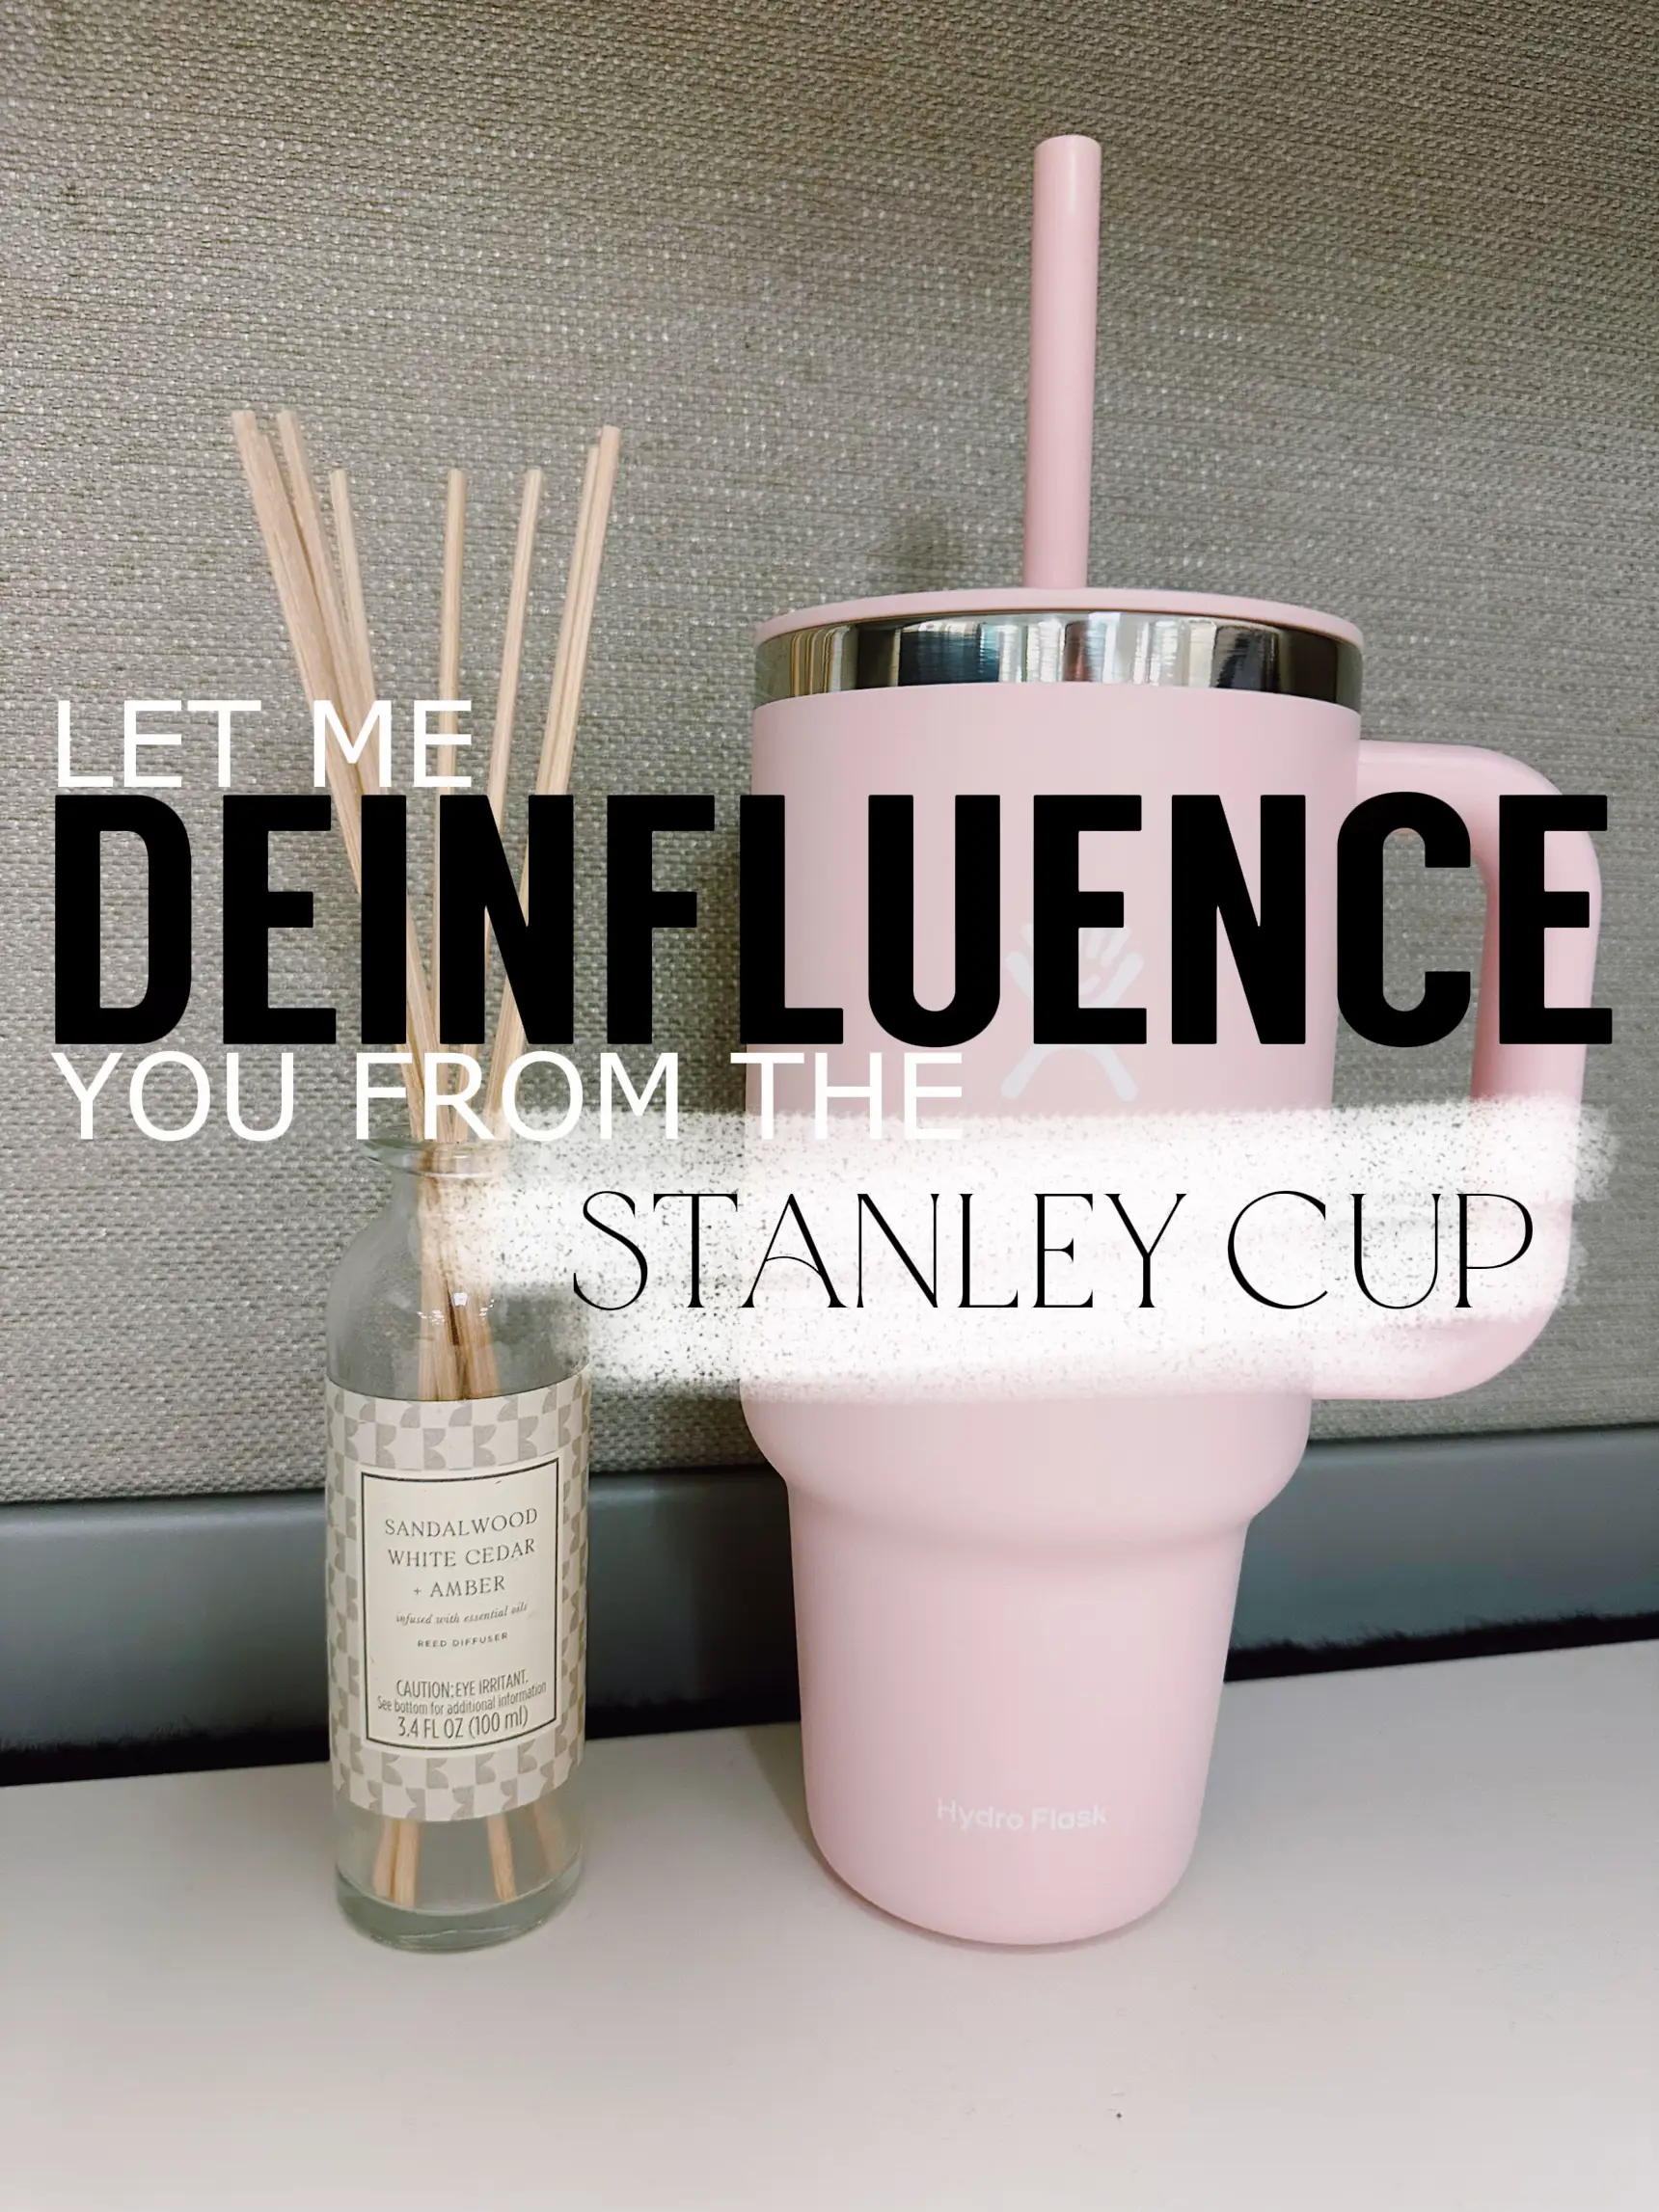 Stanley cup craze, explained: Why do we love these tumblers so